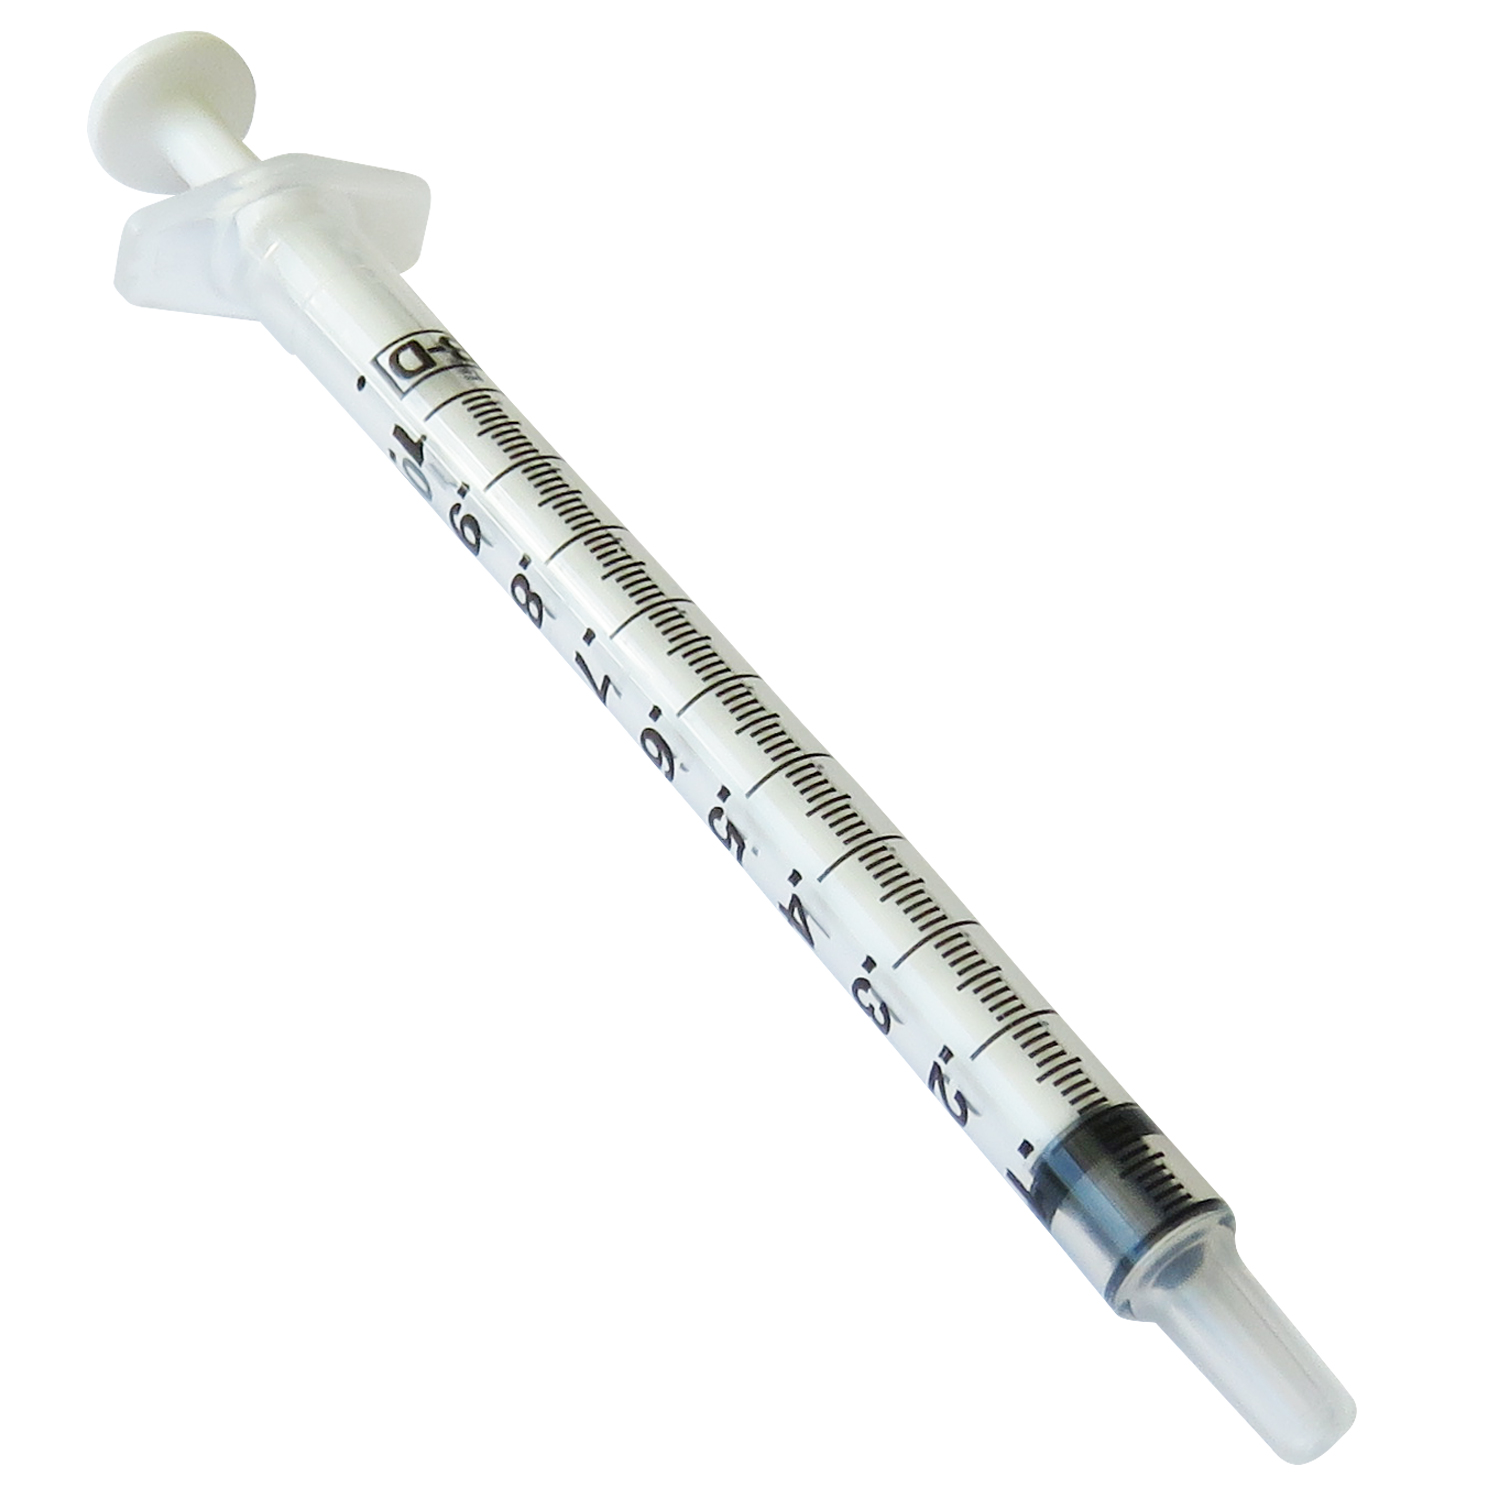 List 93+ Background Images Parts Of The Syringe And Needle Superb